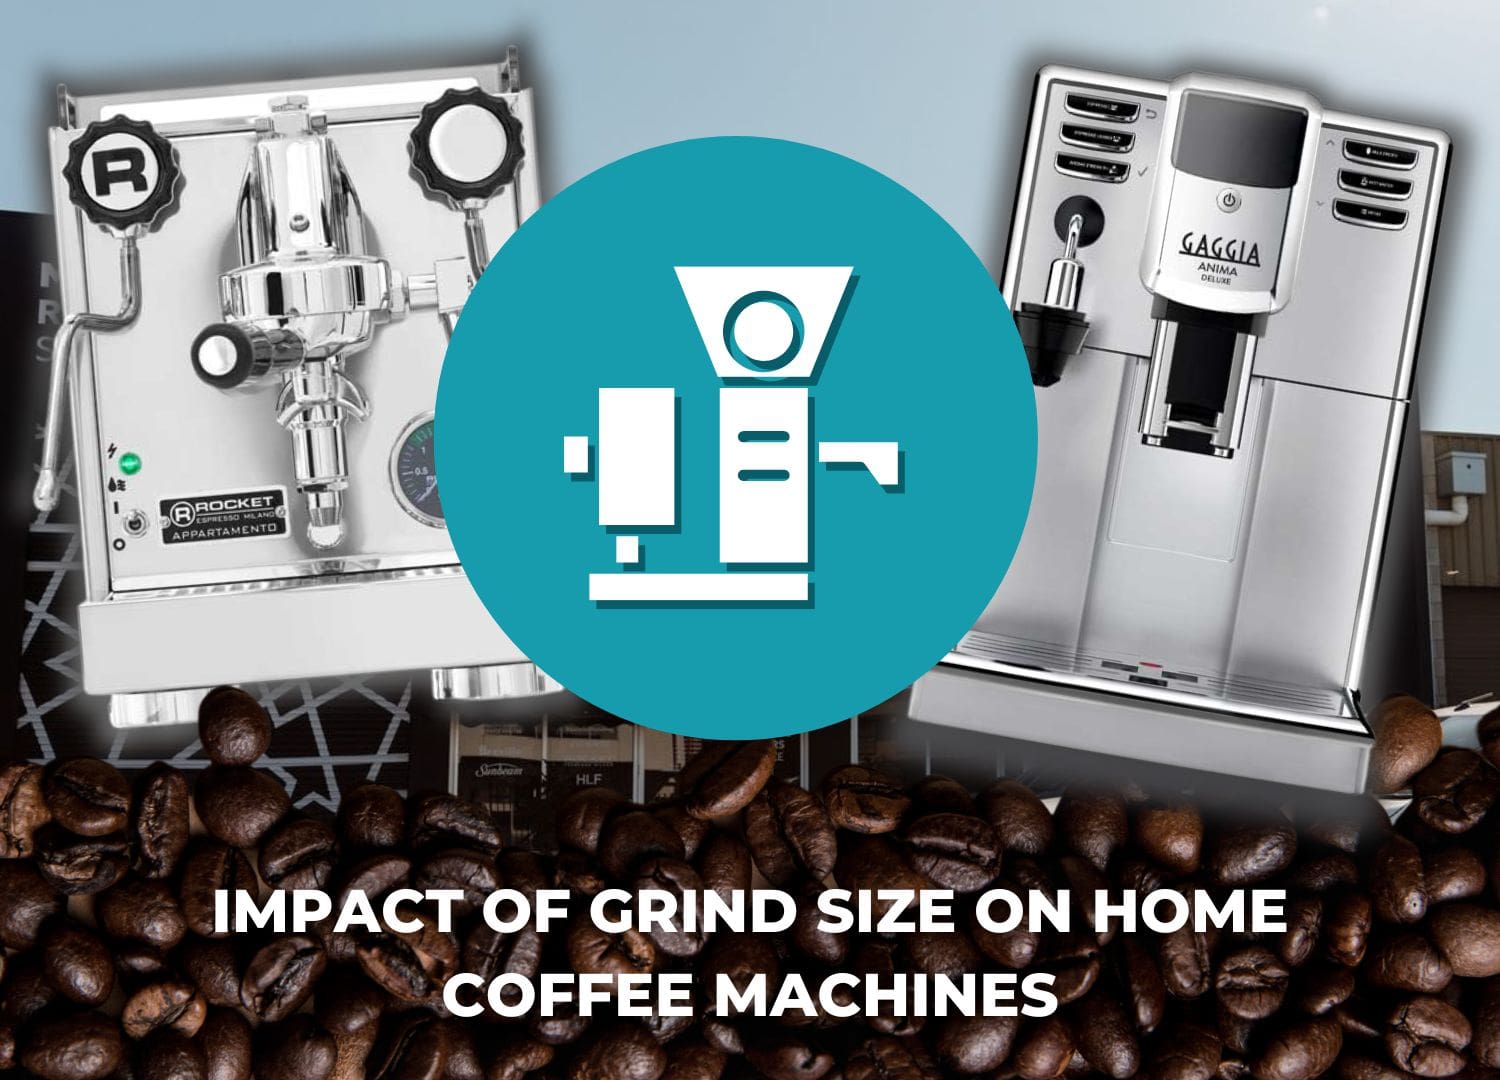 Impact of Grind Size on Home Coffee Machines